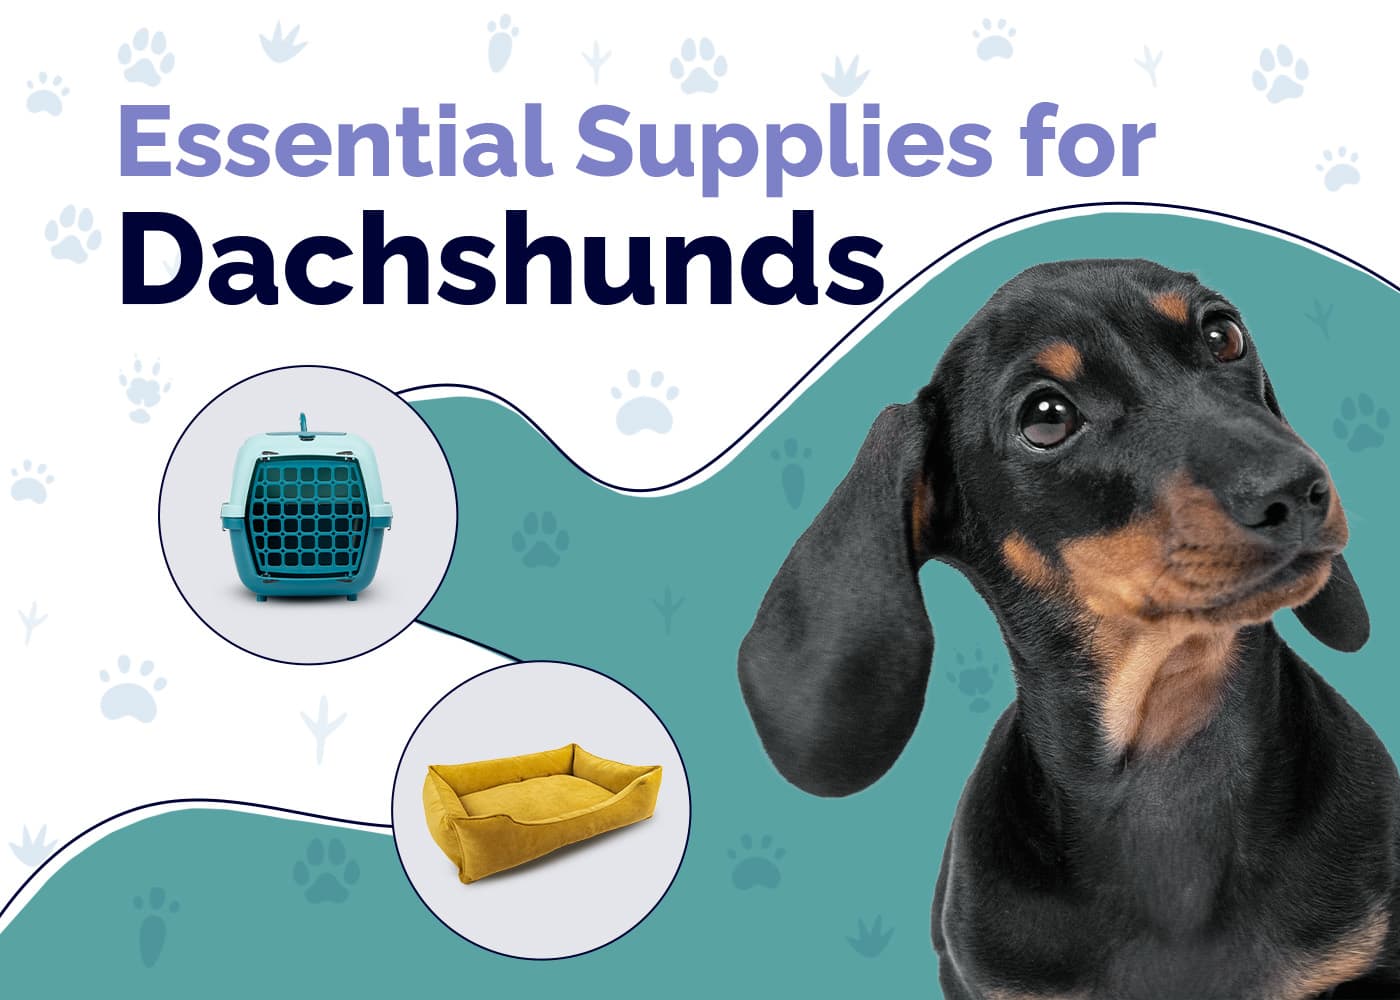 essentials for dacshunds